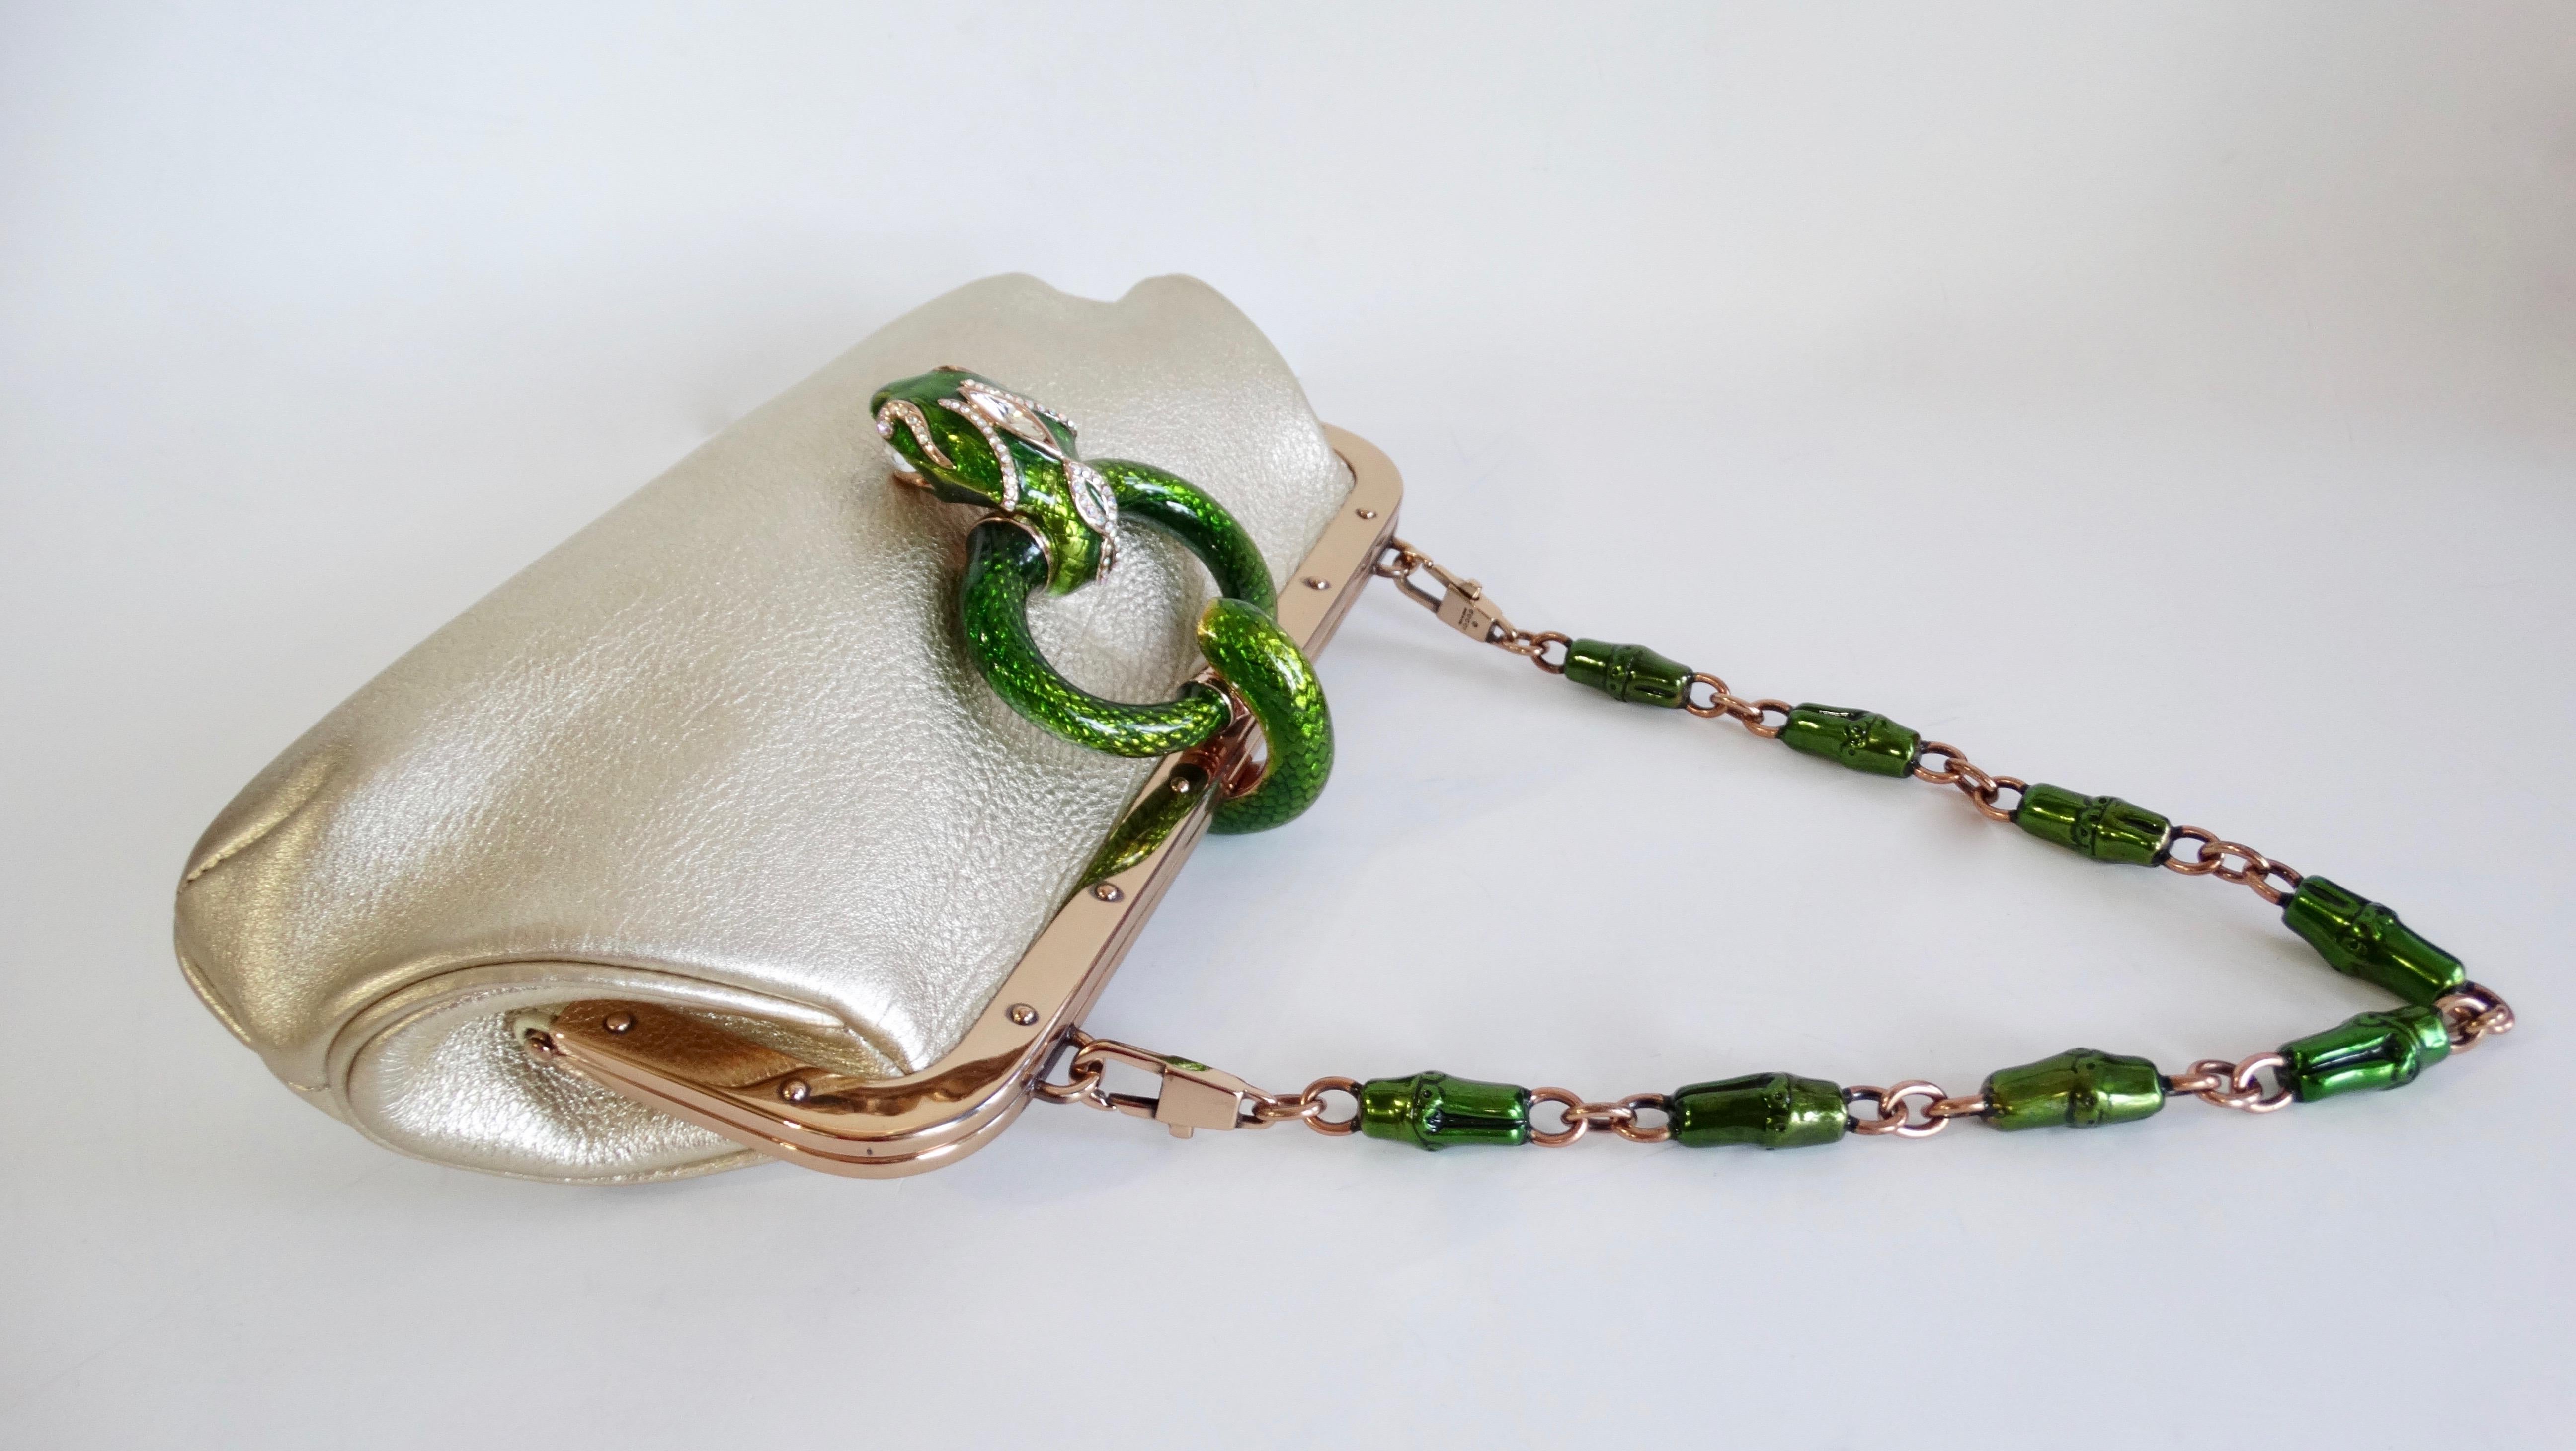 Show off with this rare Tom Ford for Gucci handbag/clutch! Circa 2004 from their S/S collection, this gold metallic pebble leather bag features gold hardware and a removable green enamel bamboo chain link strap. Includes a green enamel snake knocker